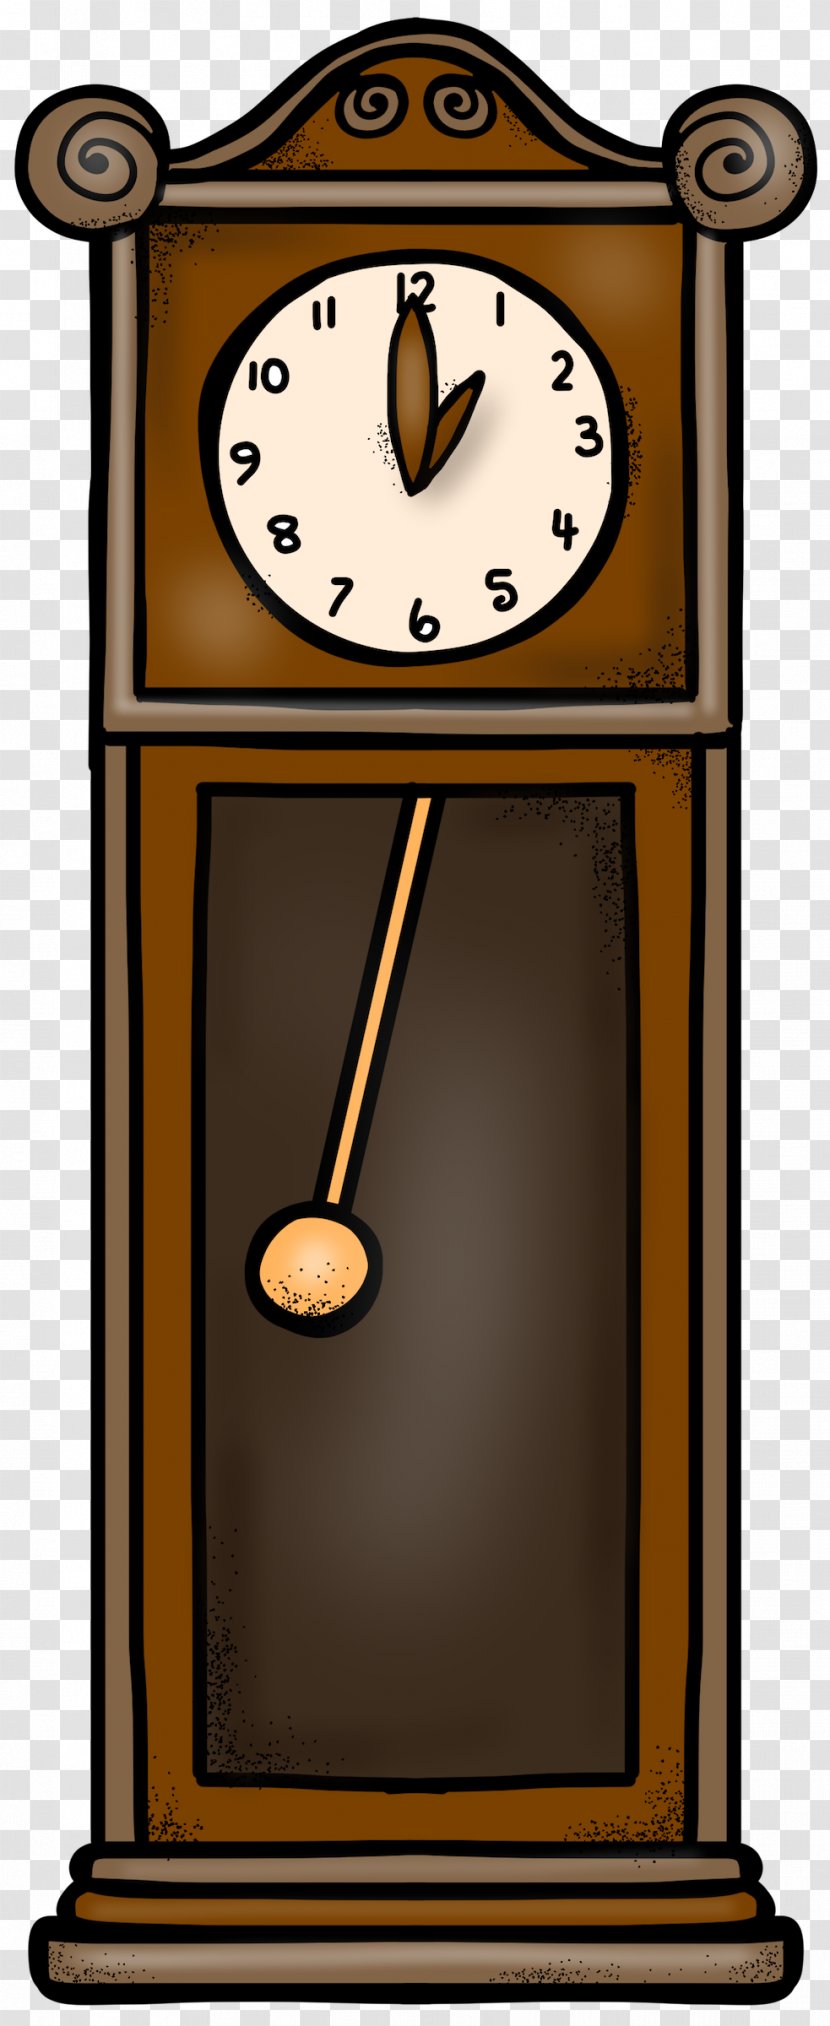 The Clock Struck One: A Time-Telling Tale Hickory Dickory Dock Clip Art - Nursery Rhyme Transparent PNG